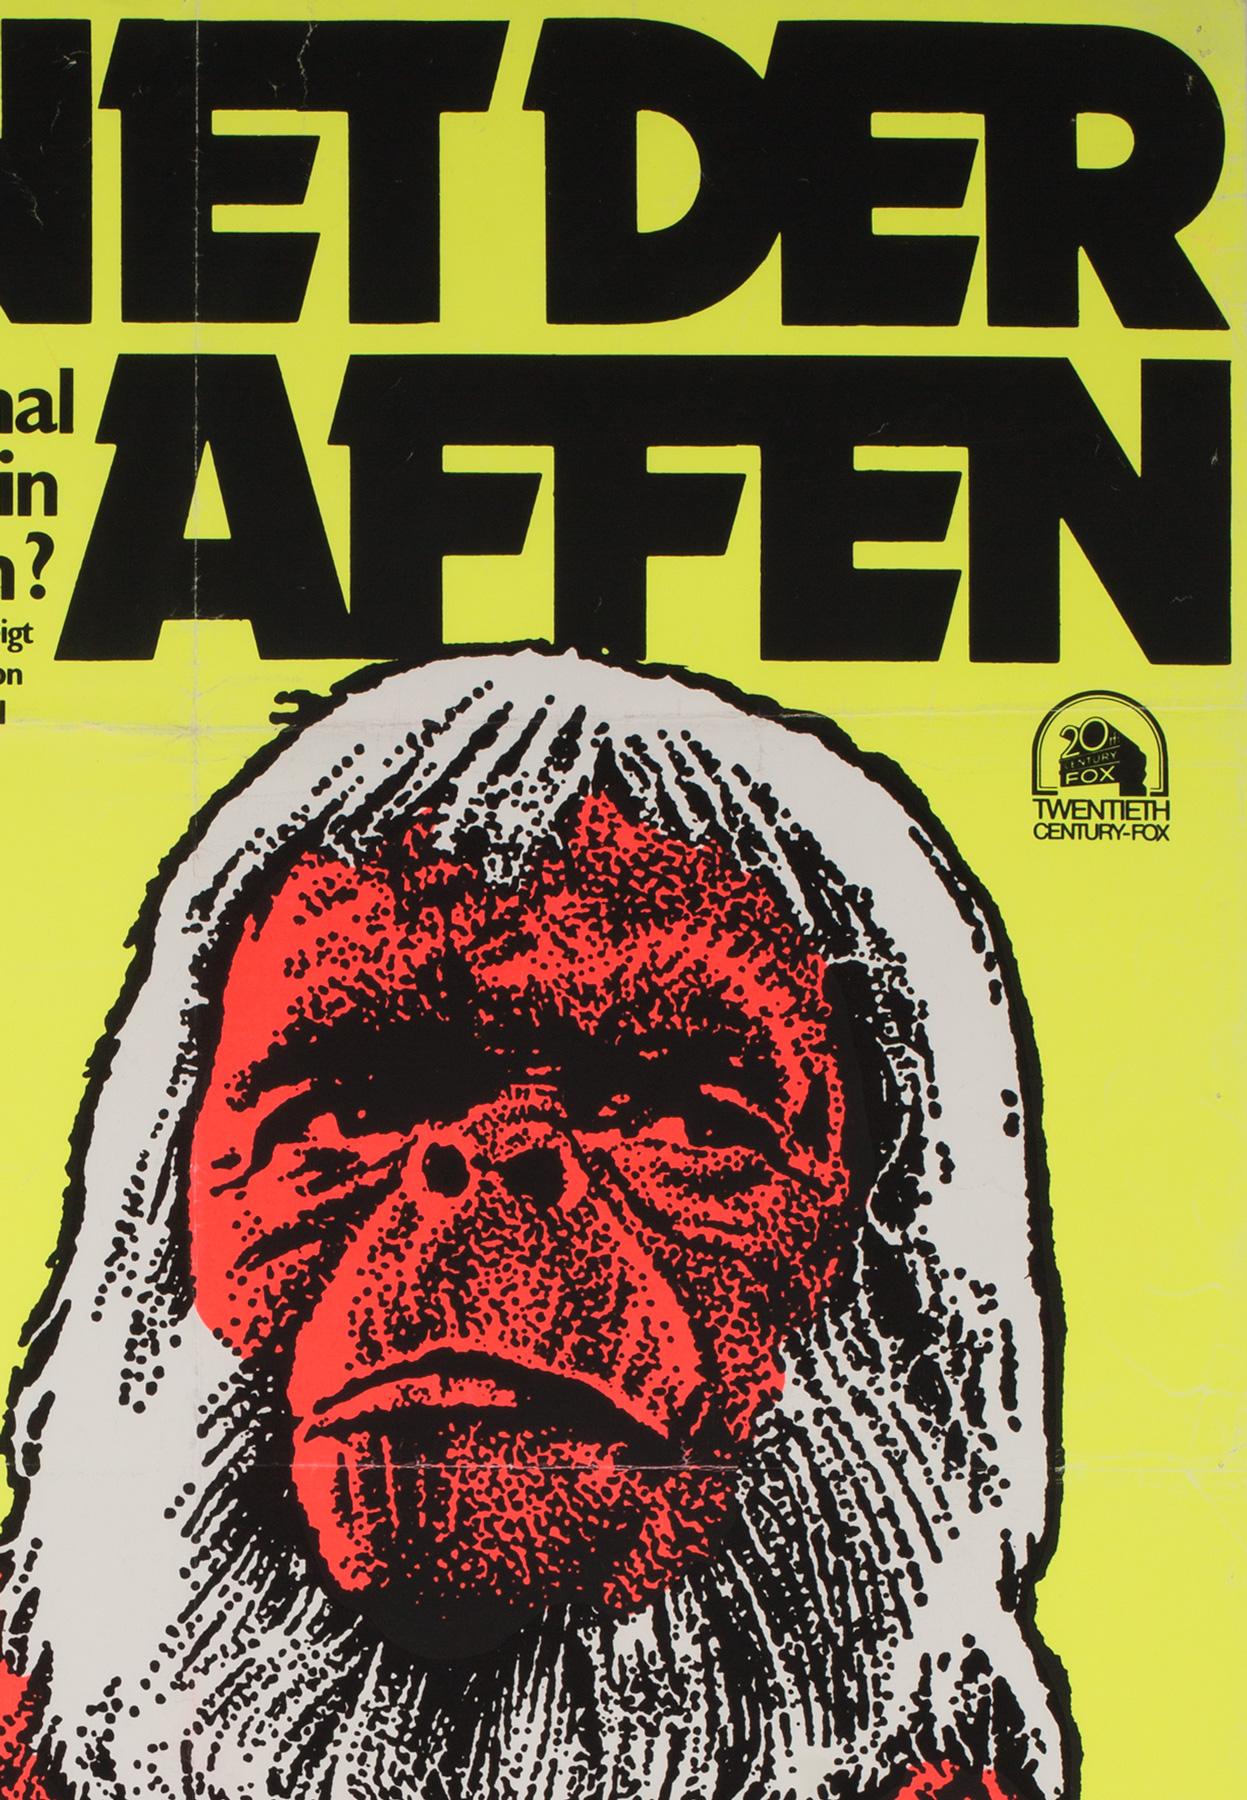 The fabulous 1975 East German re-release for Planet of the Apes. Fantastic fluorescent day-glow colors. Looks fab under a black light/UV light (as shown in the last image).

This very rare vintage movie poster is sized 23 1/4 x 33 inches.